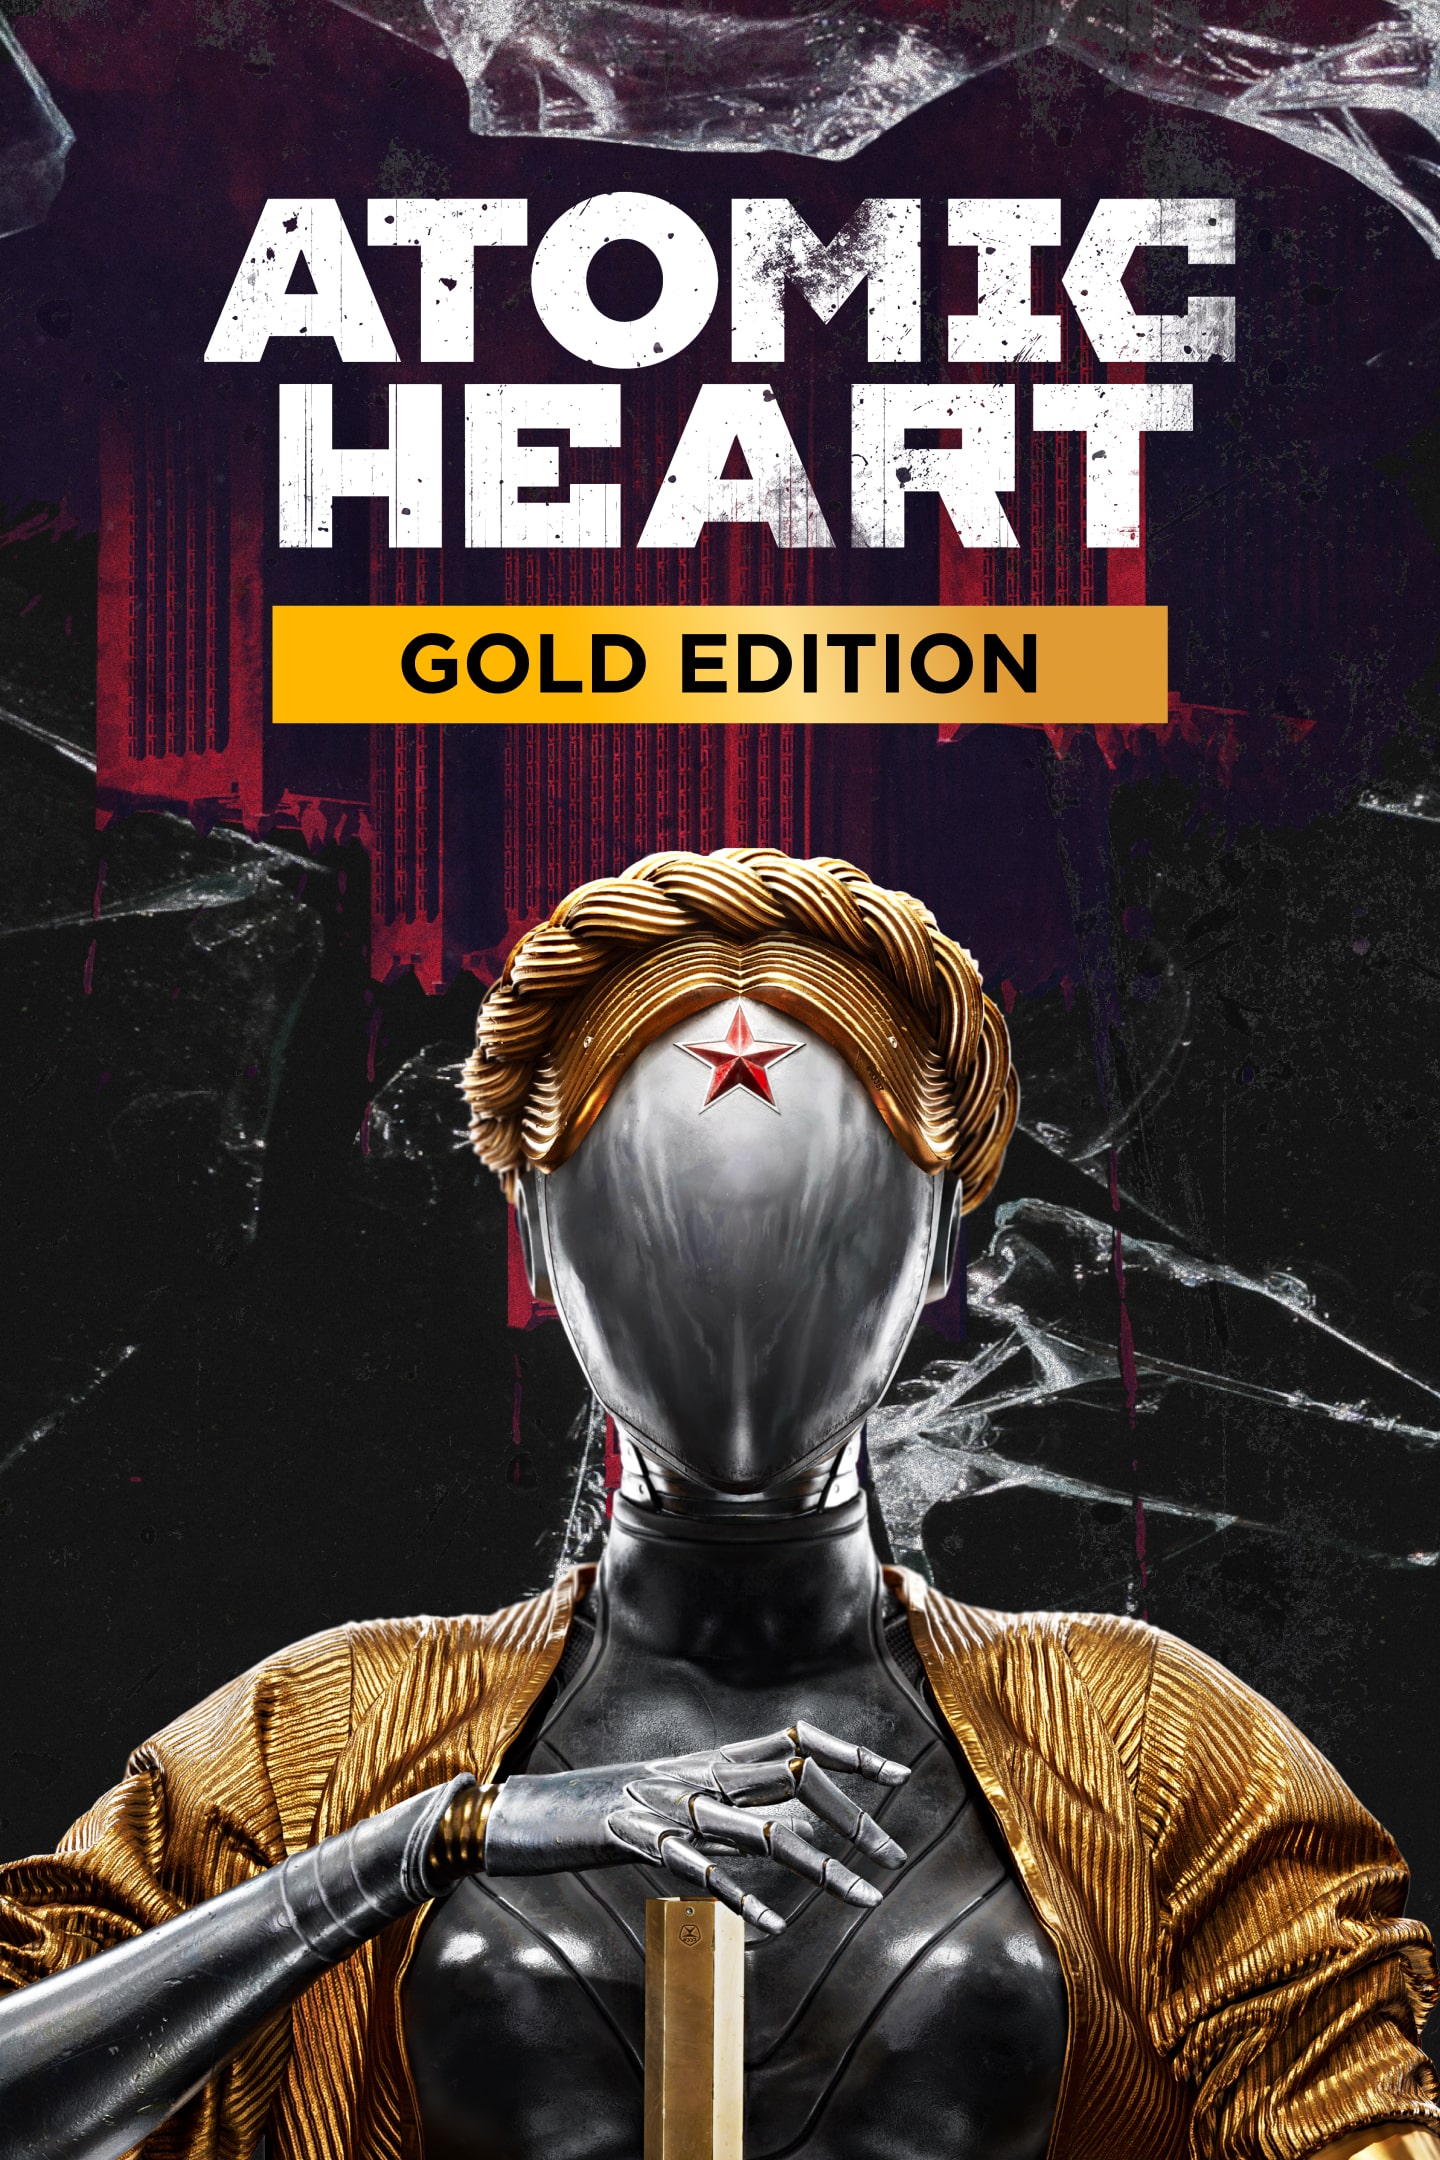 Atomic Heart (PS4 & PS5)